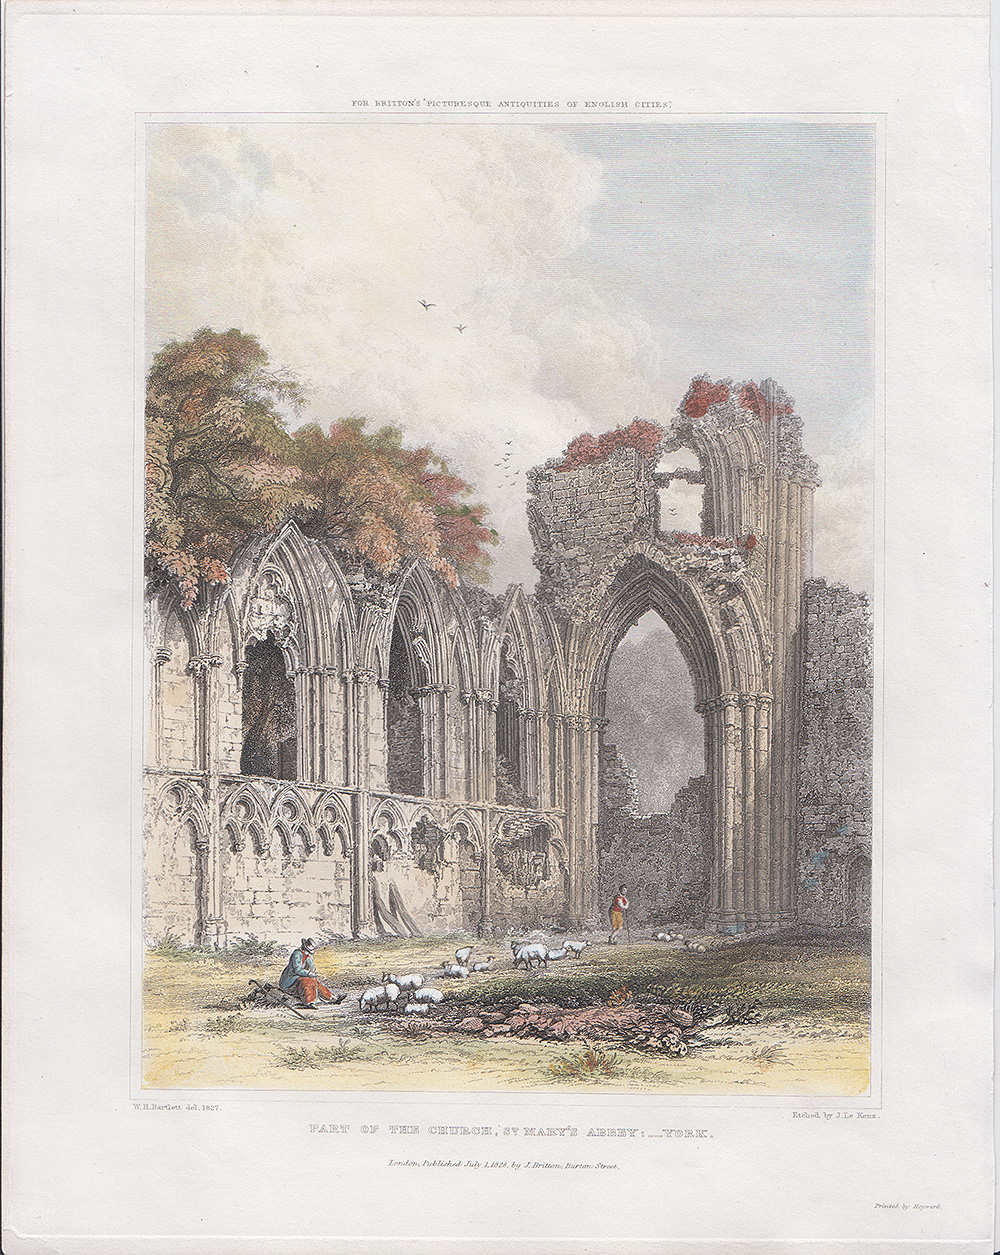 Part of the Church, St. Mary's Abbey,York.